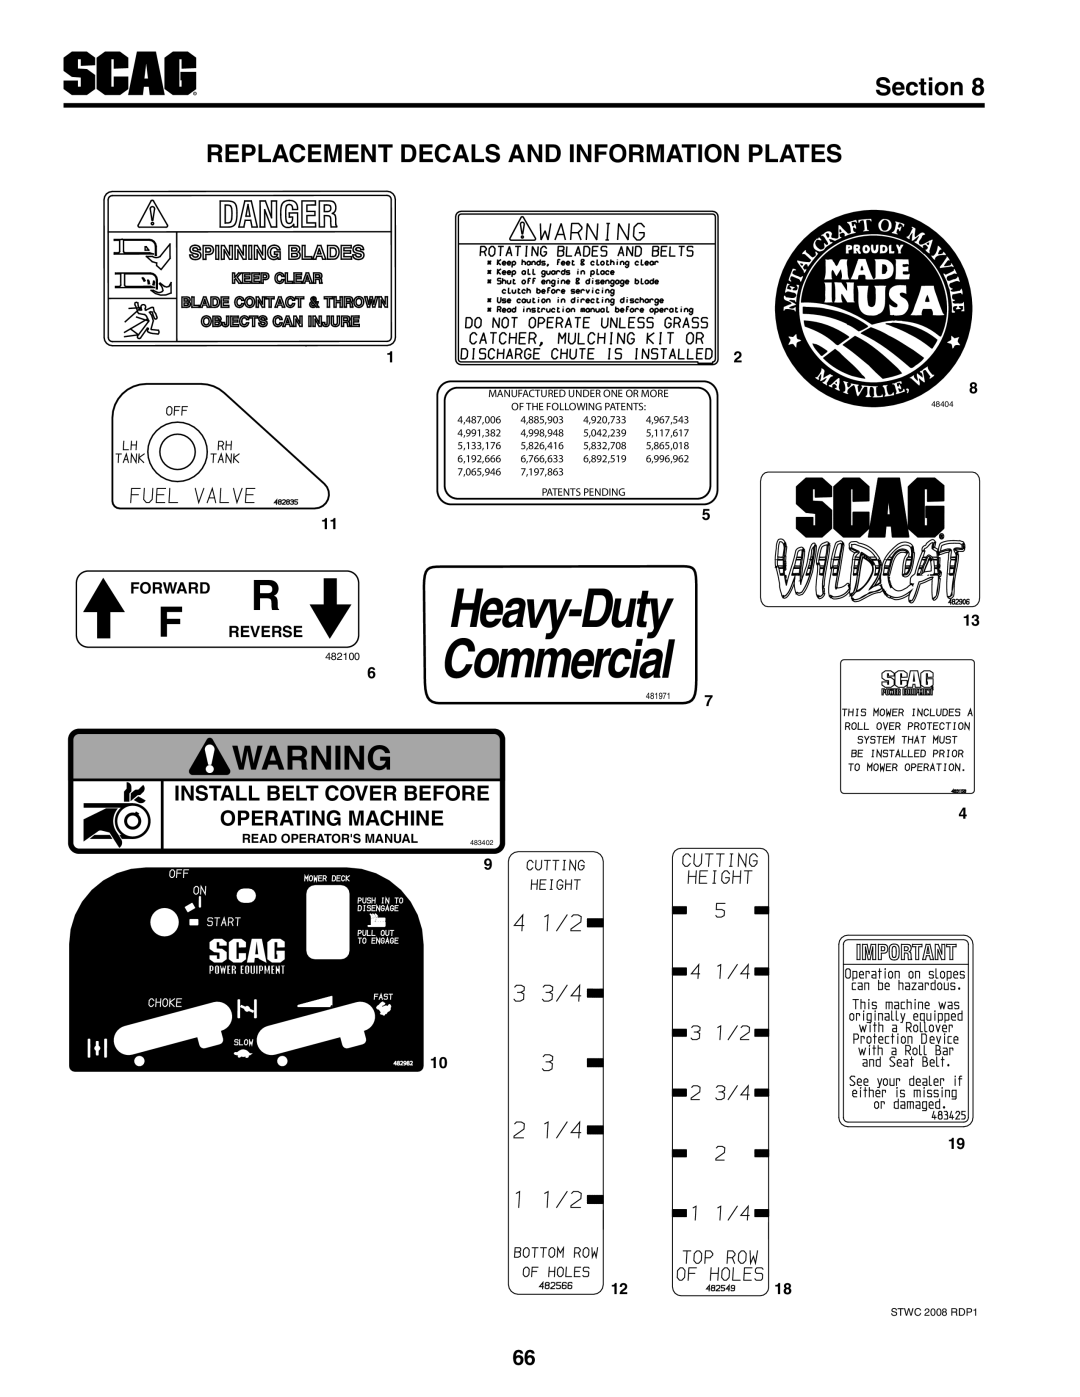 Scag Power Equipment STWC52V-25KA manual Replacement Decals And Information Plates, Heavy-Duty, Commercial, Section, 482100 